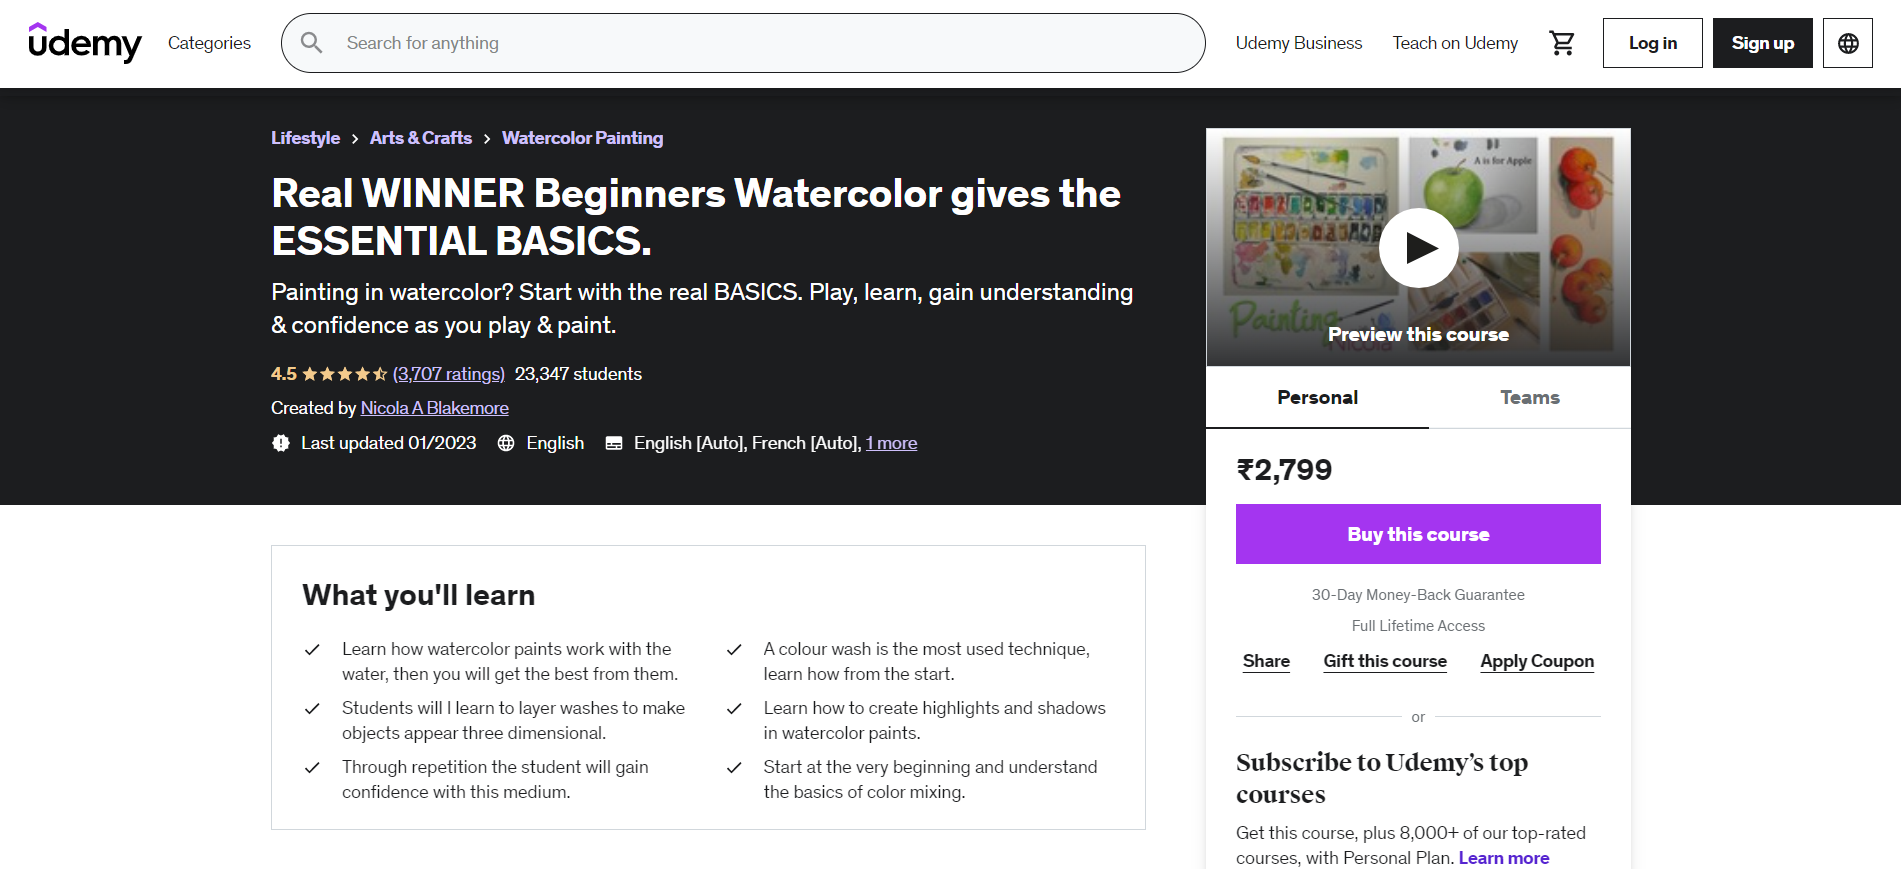 Real WINNER Beginners Watercolor gives the ESSENTIAL BASICS